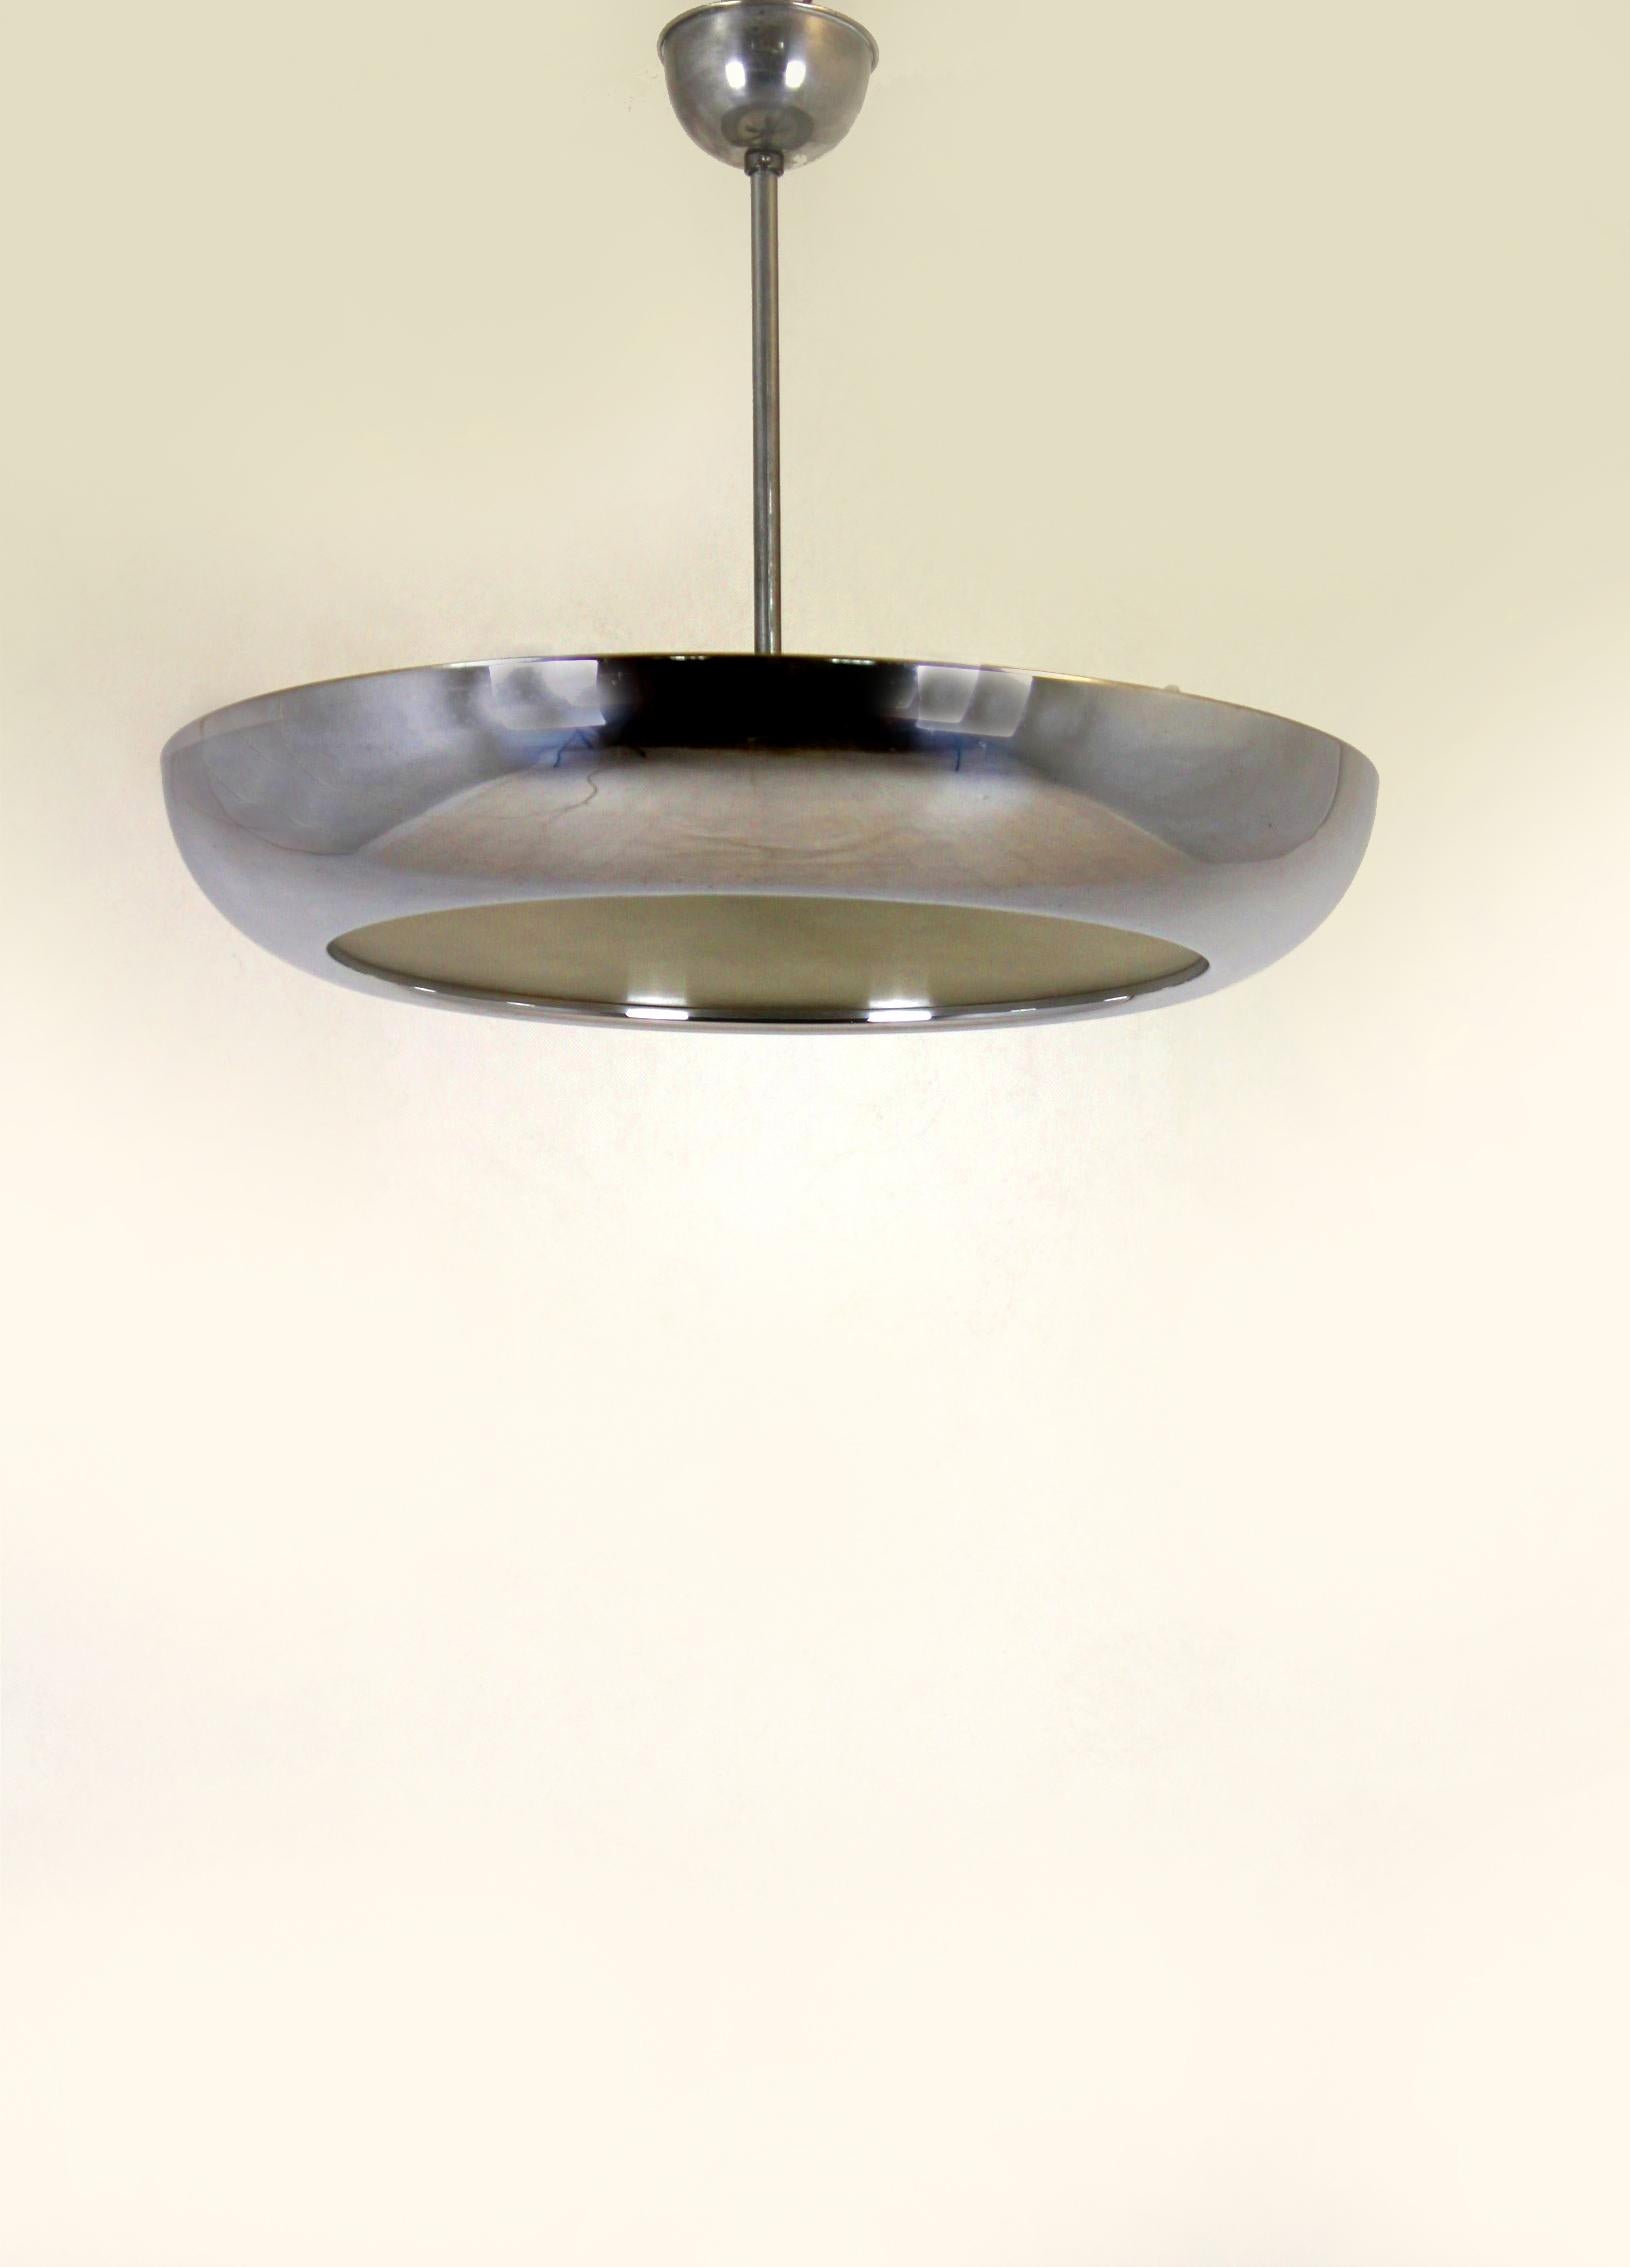 – Bauhaus UFO pendant lamp designed by Josef Hurka for Napako
– Produced in the 1930s
– Made of chromed metal and glass, features four bakelite lampholders
– In a original vintage condition.
   